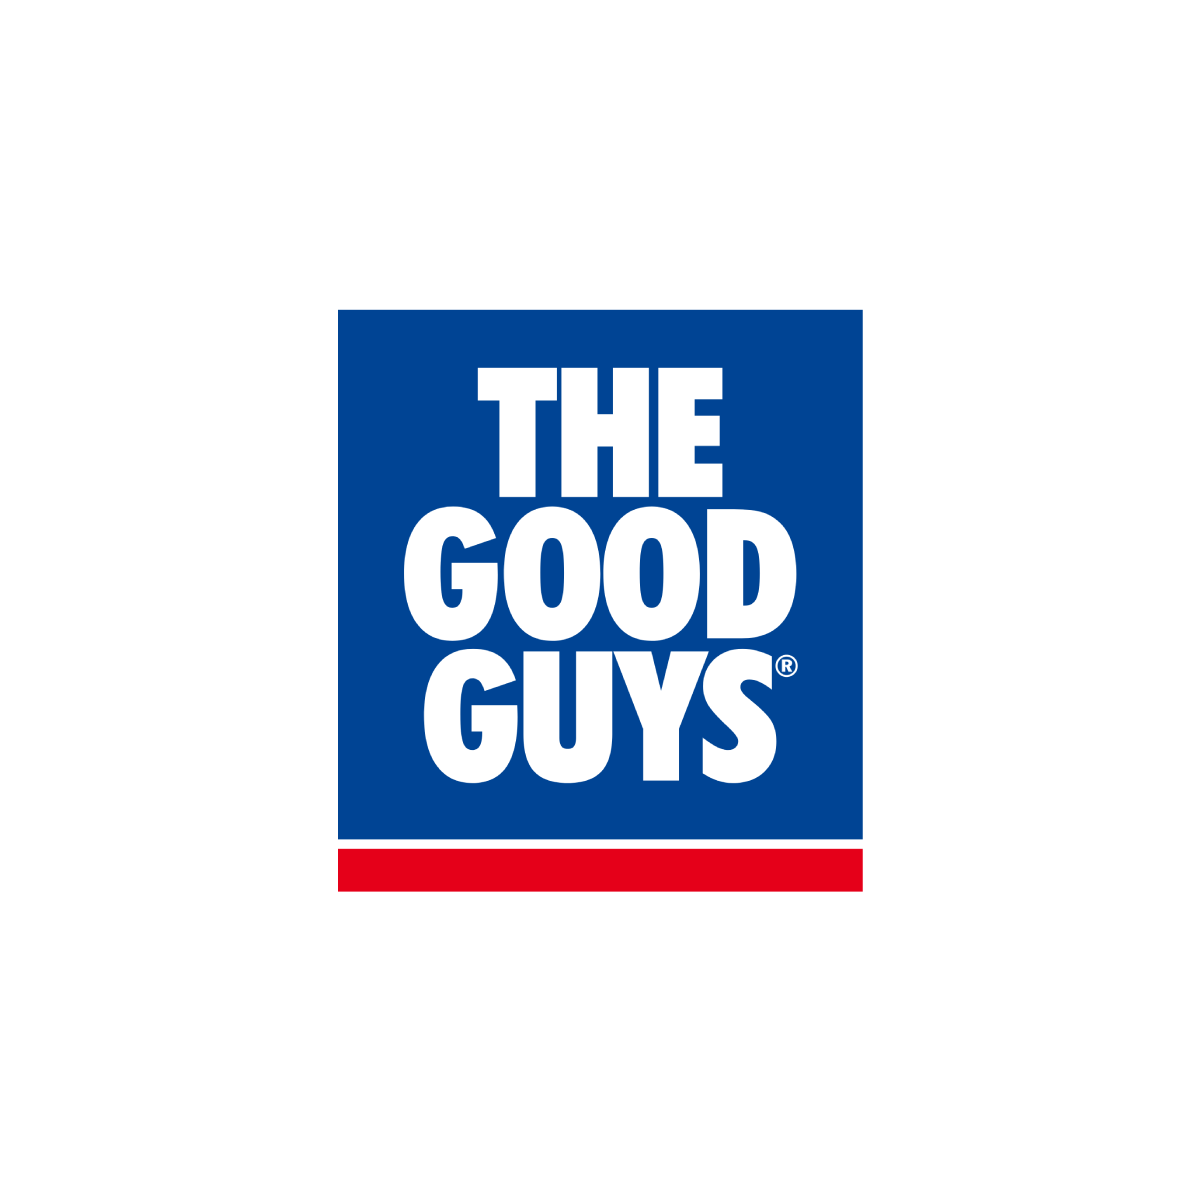 The Good Guys - Online Electrical & Home Appliances